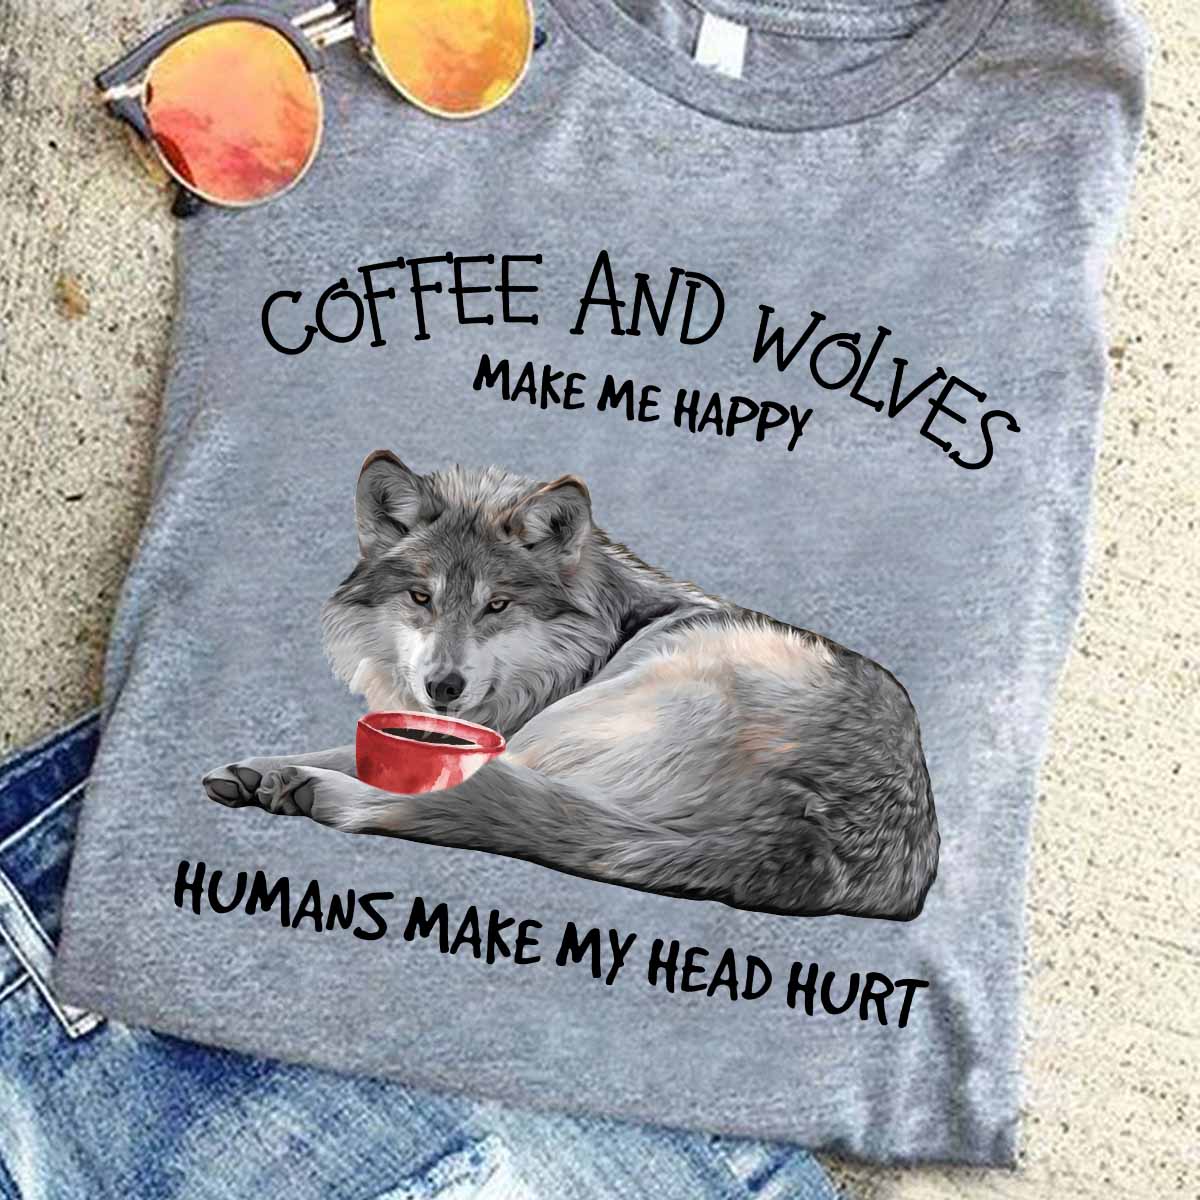 Coffee and wolves make me happy humans make my head hurt - Coffee and wolves